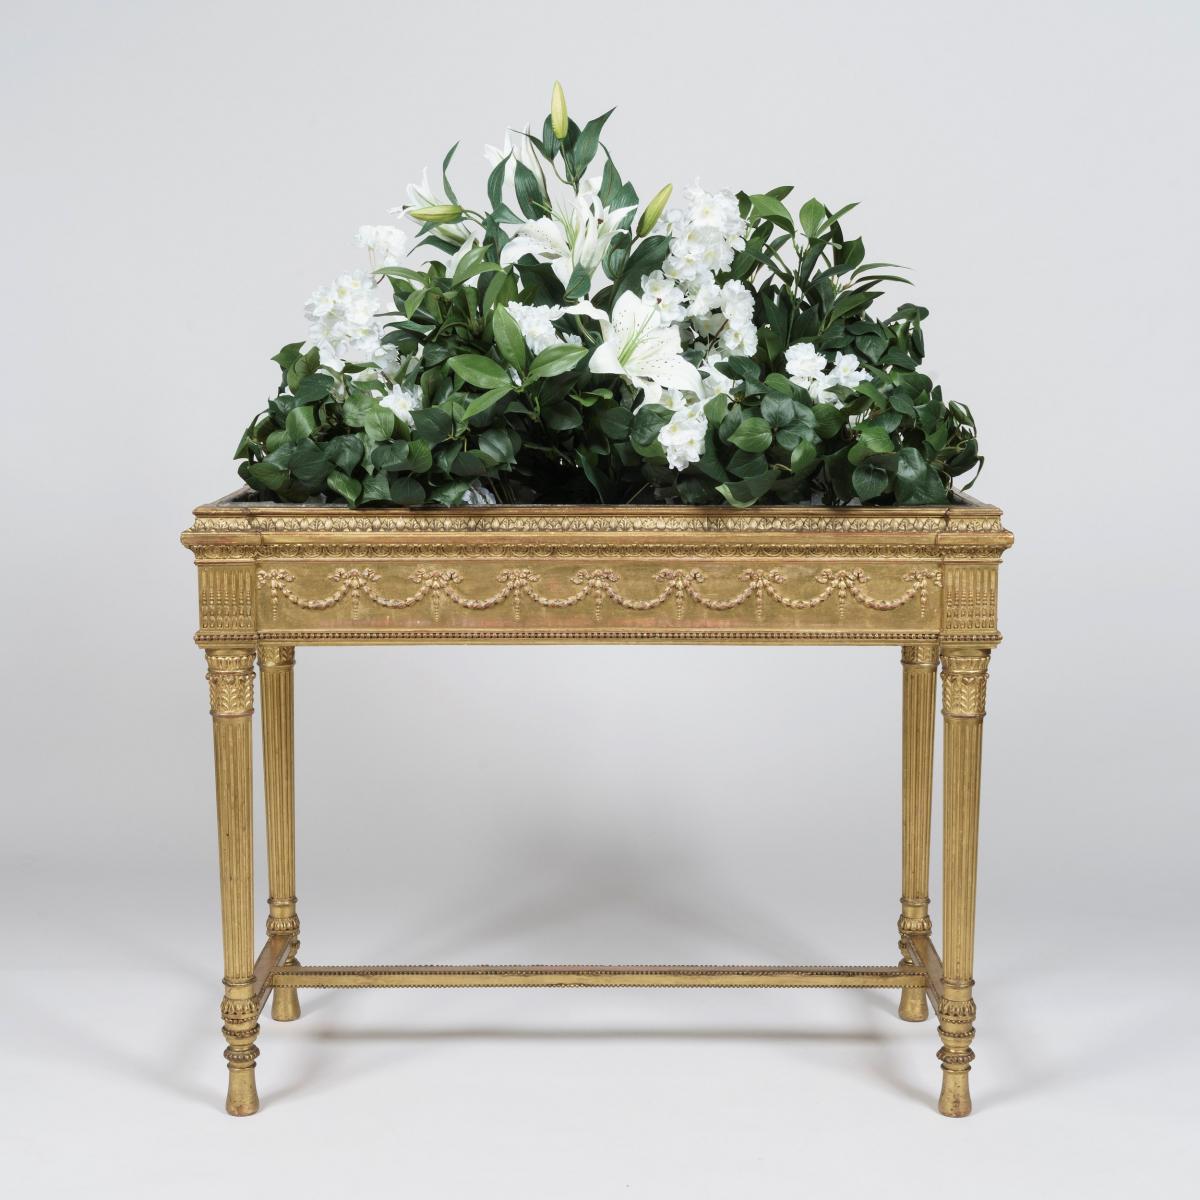 A Pair of Neo-Classical Giltwood Jardinières